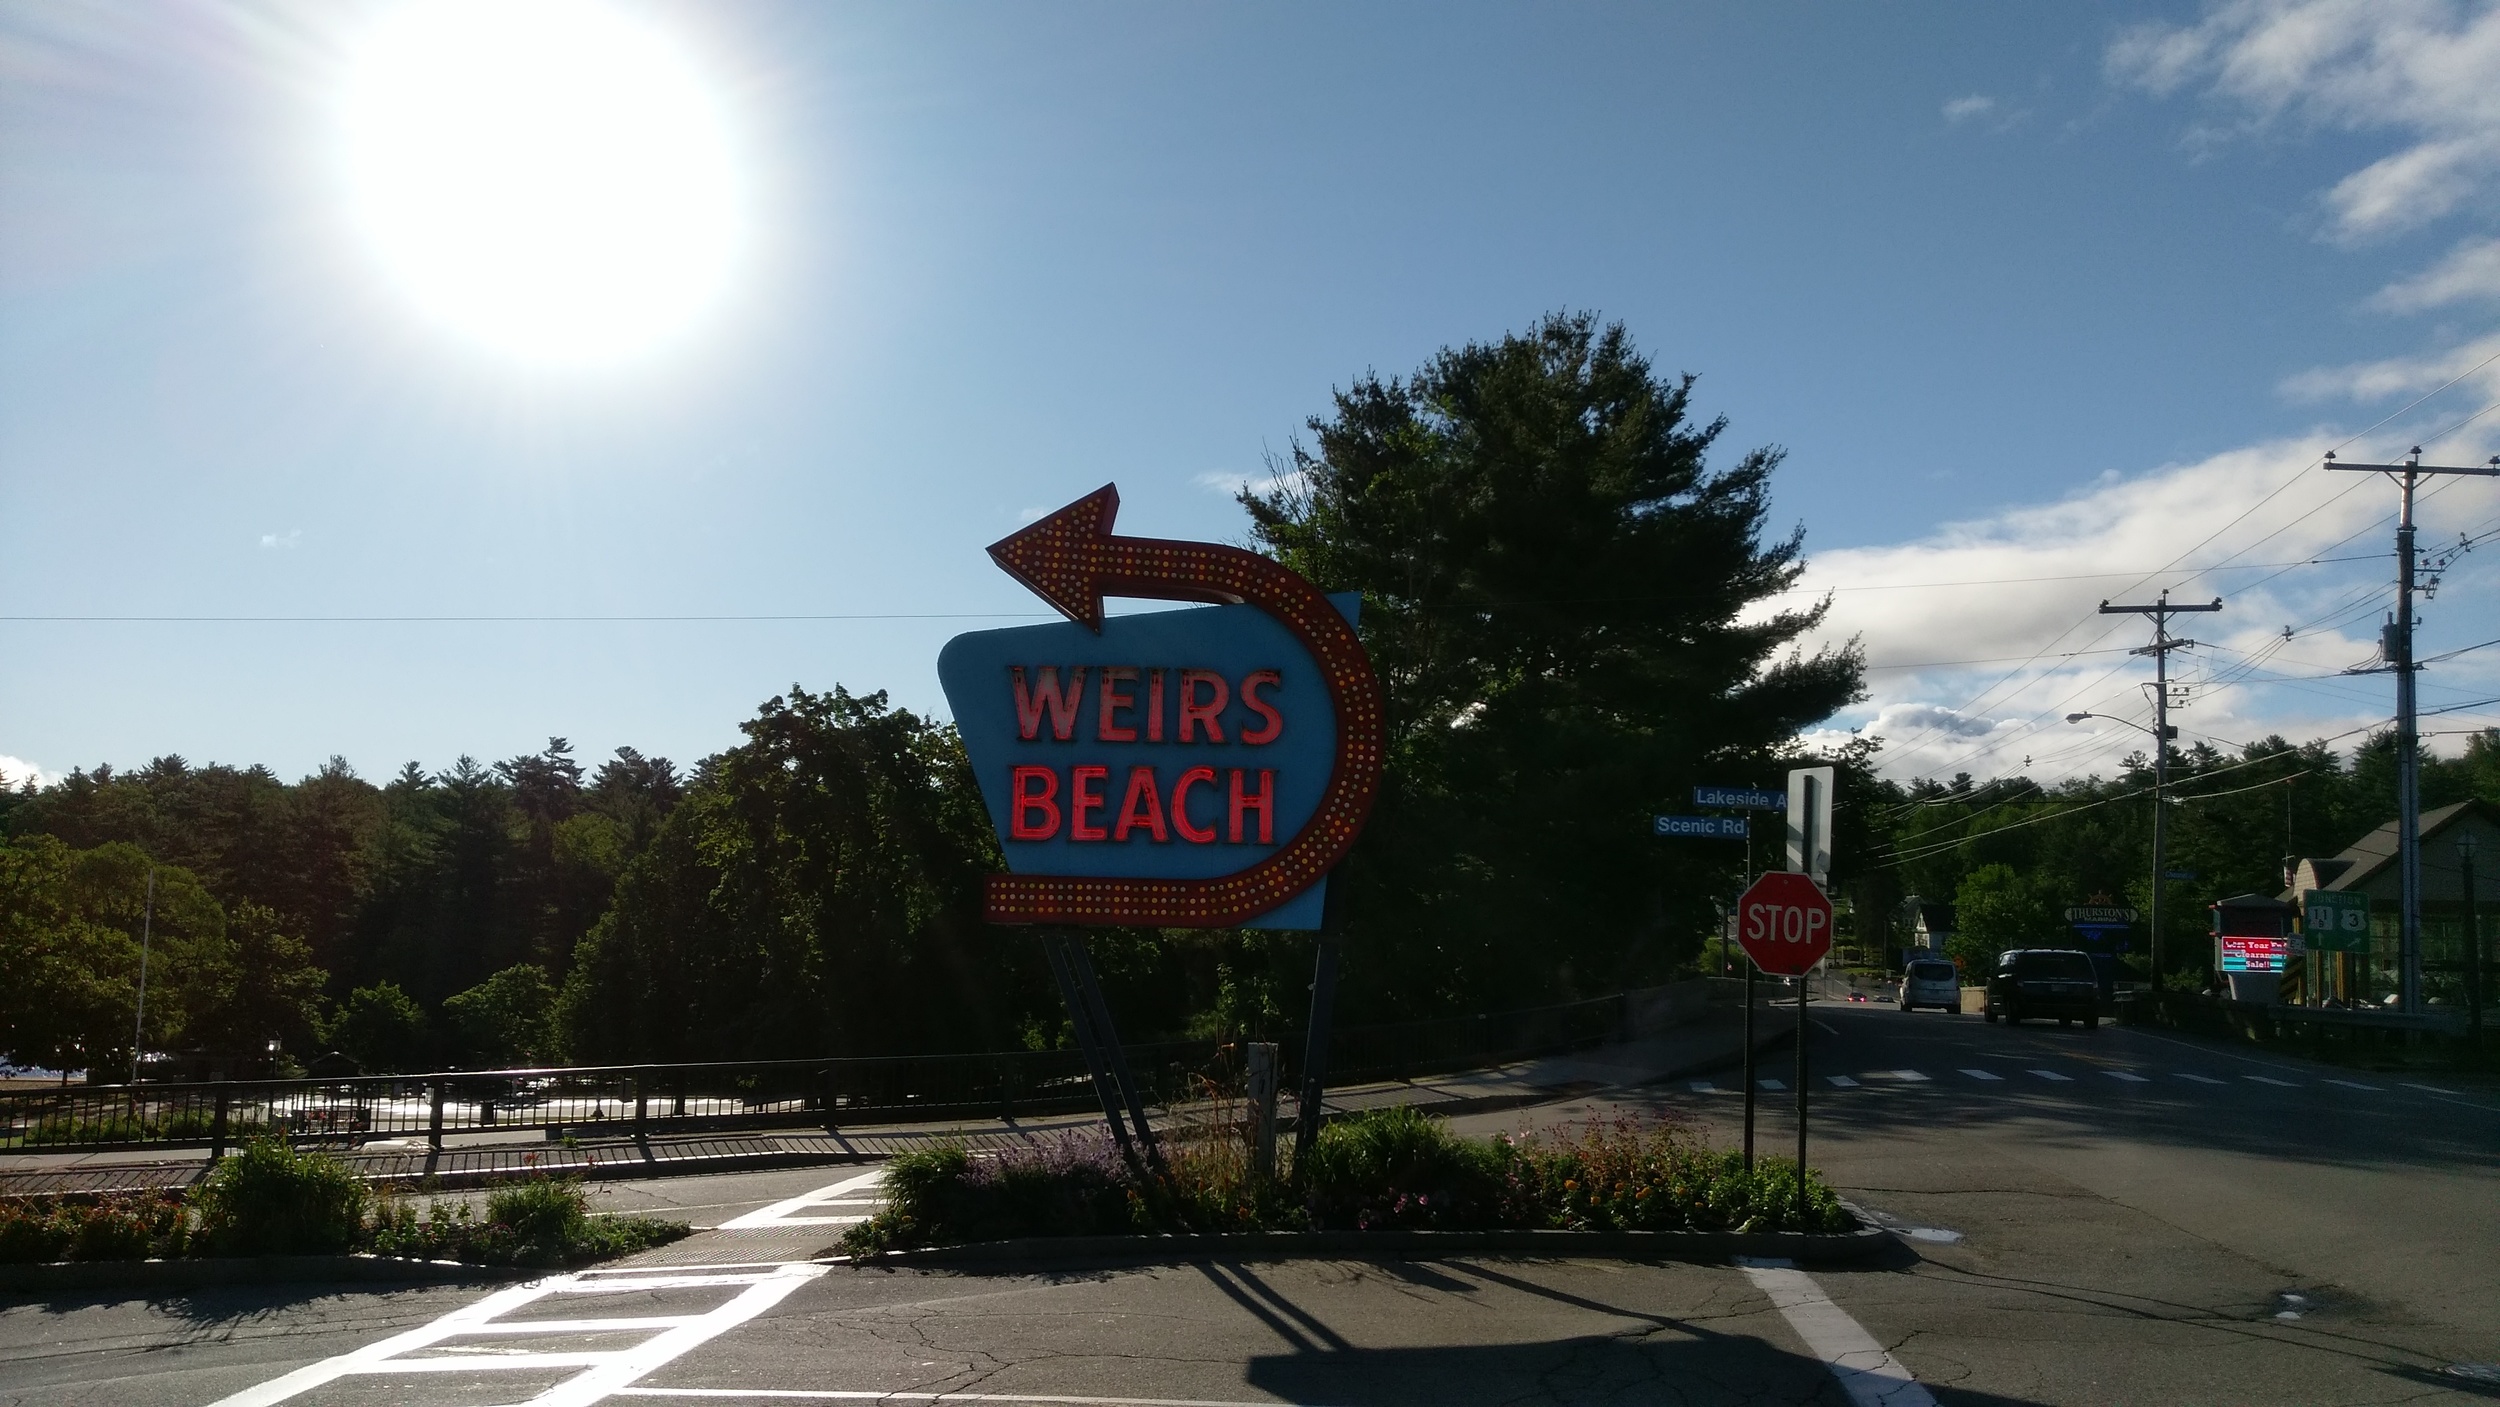 The famous Weirs Beach sign